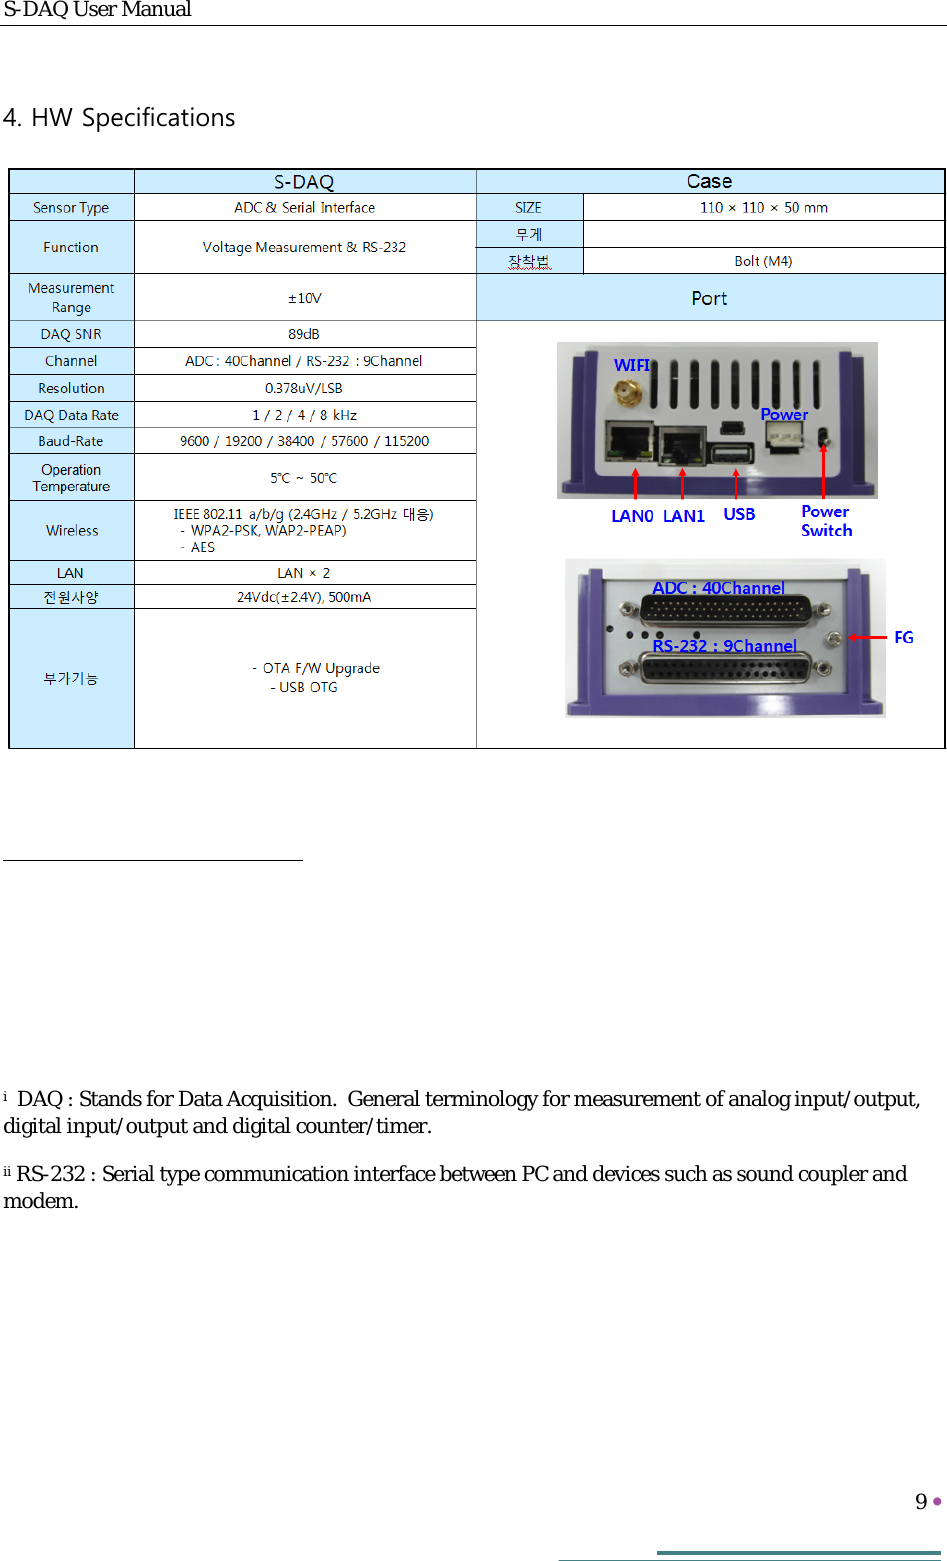 S-DAQ User Manual   9     4. HW Specifications                                                                    i  DAQ : Stands for Data Acquisition.  General terminology for measurement of analog input/output, digital input/output and digital counter/timer. ii RS-232 : Serial type communication interface between PC and devices such as sound coupler and modem. 